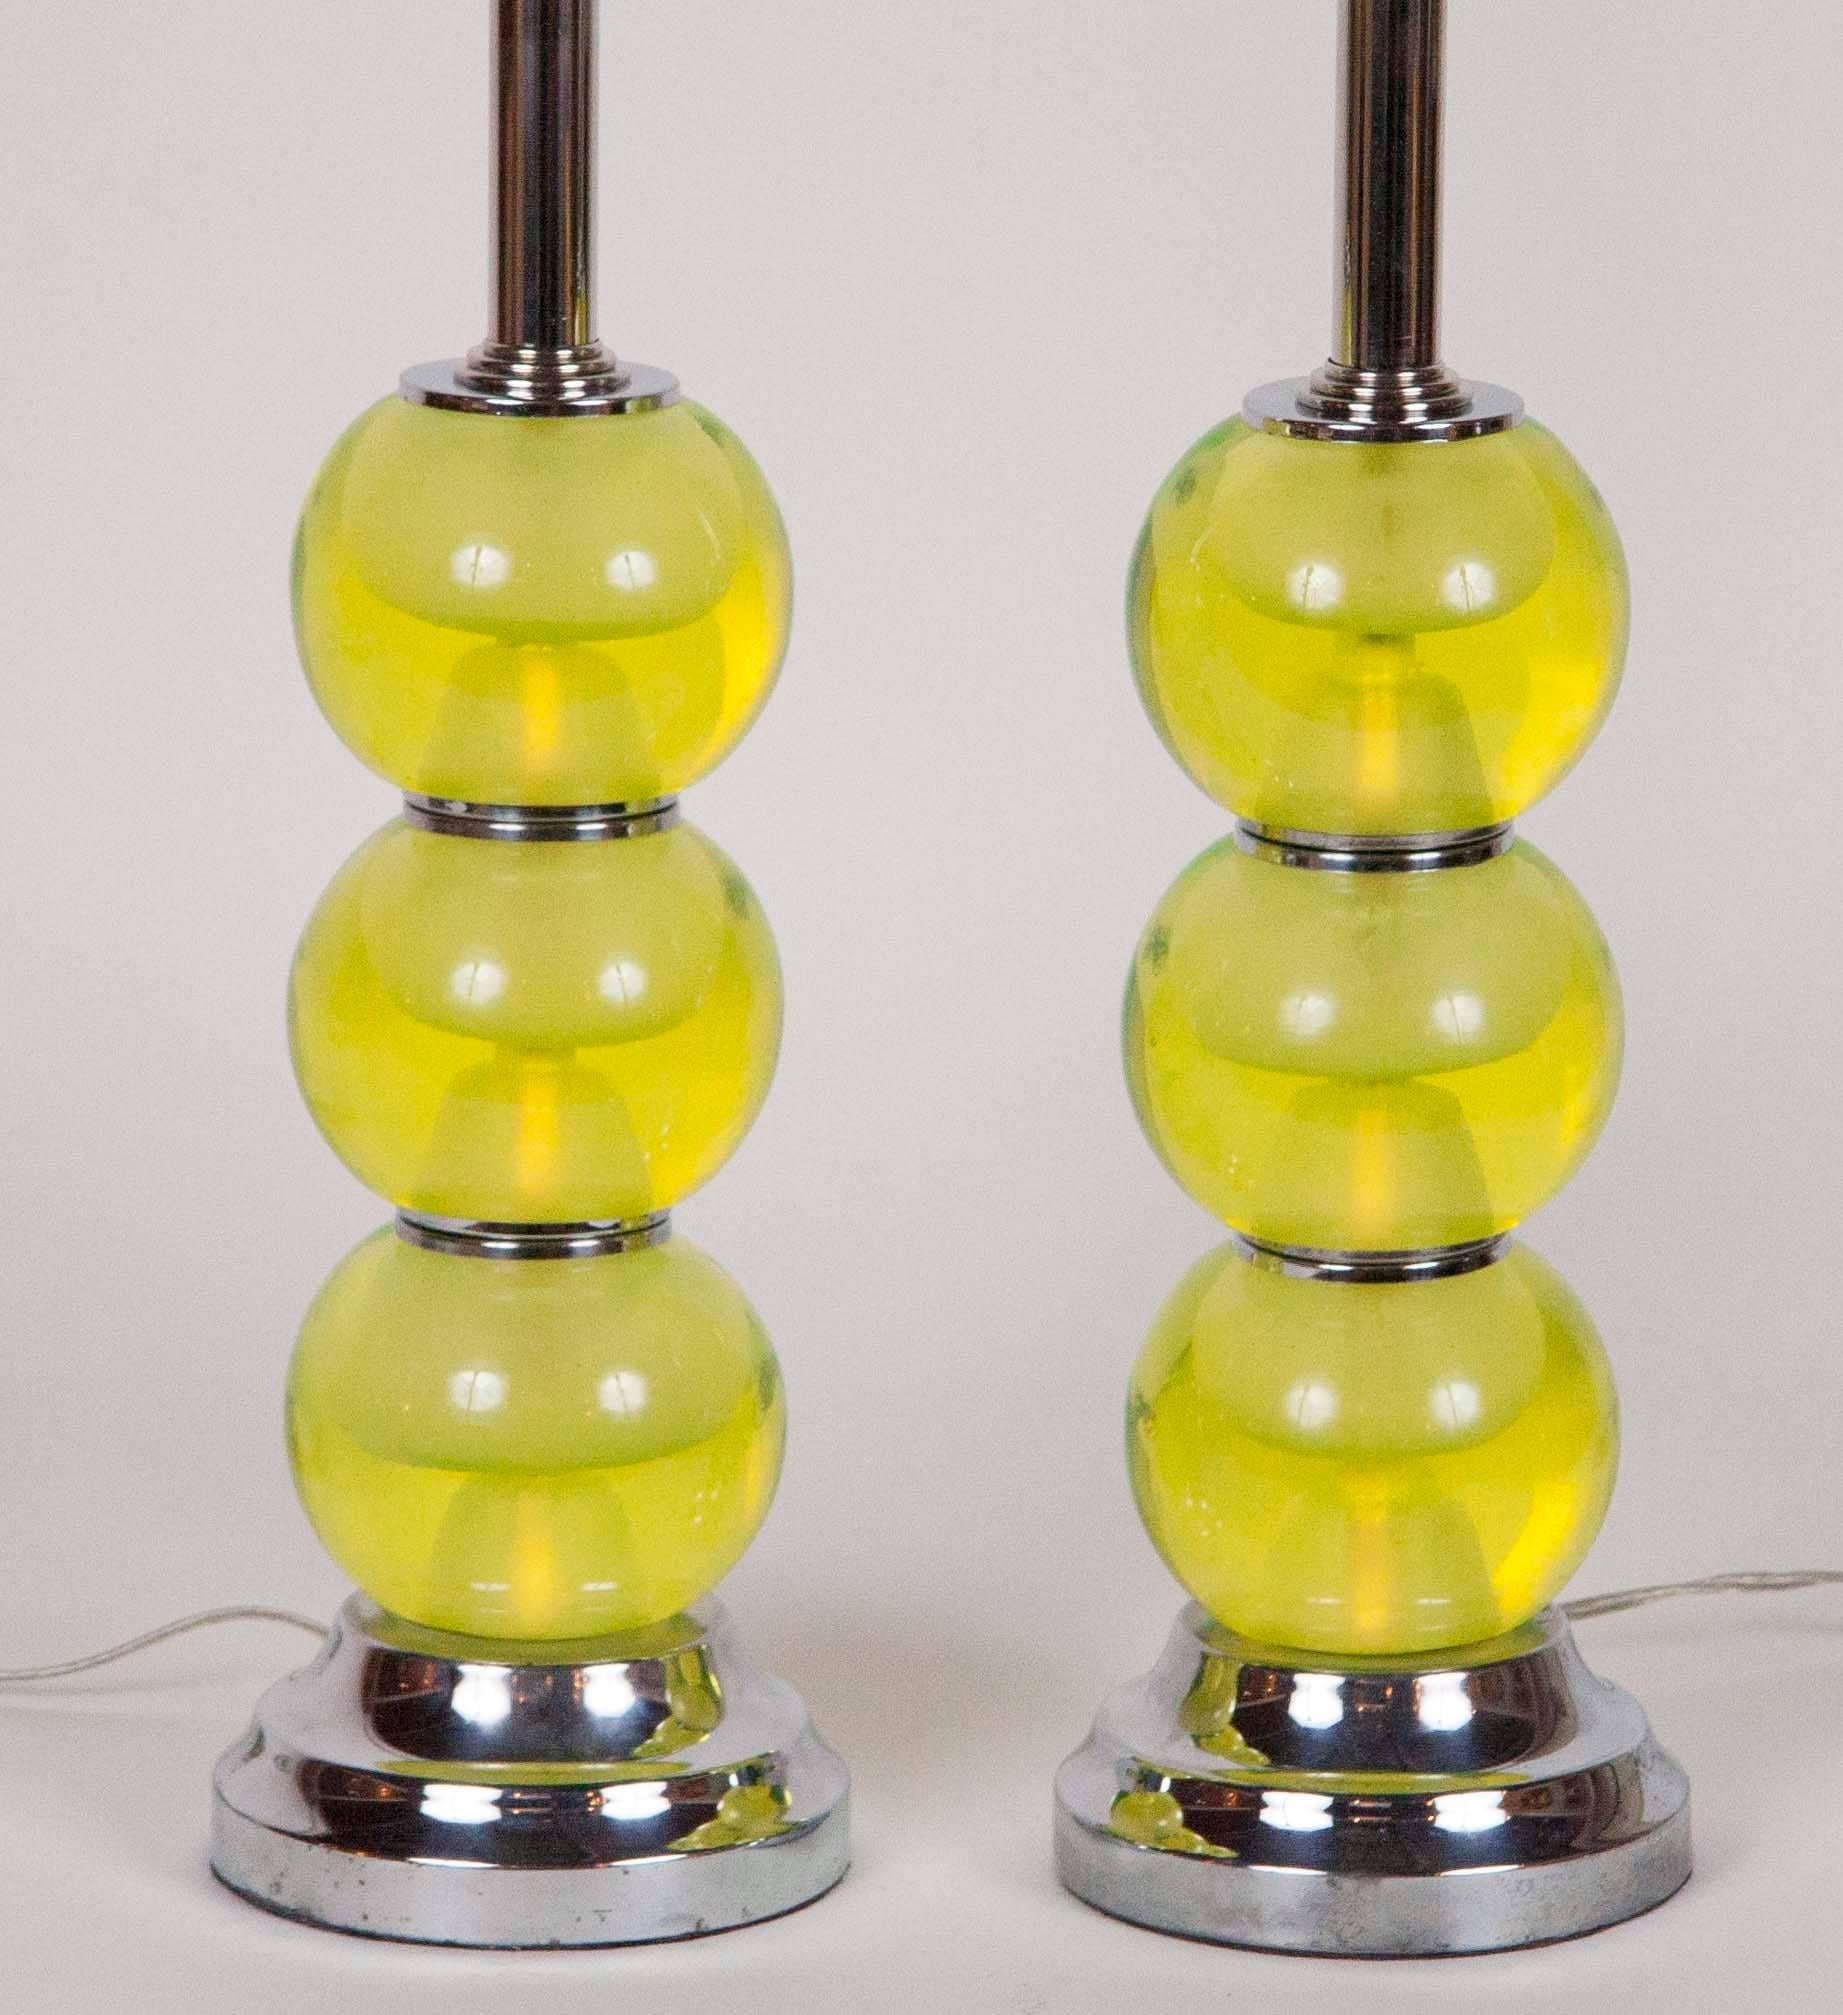 A pair of vintage Mid-Century Murano glass lamps with chrome mounts.